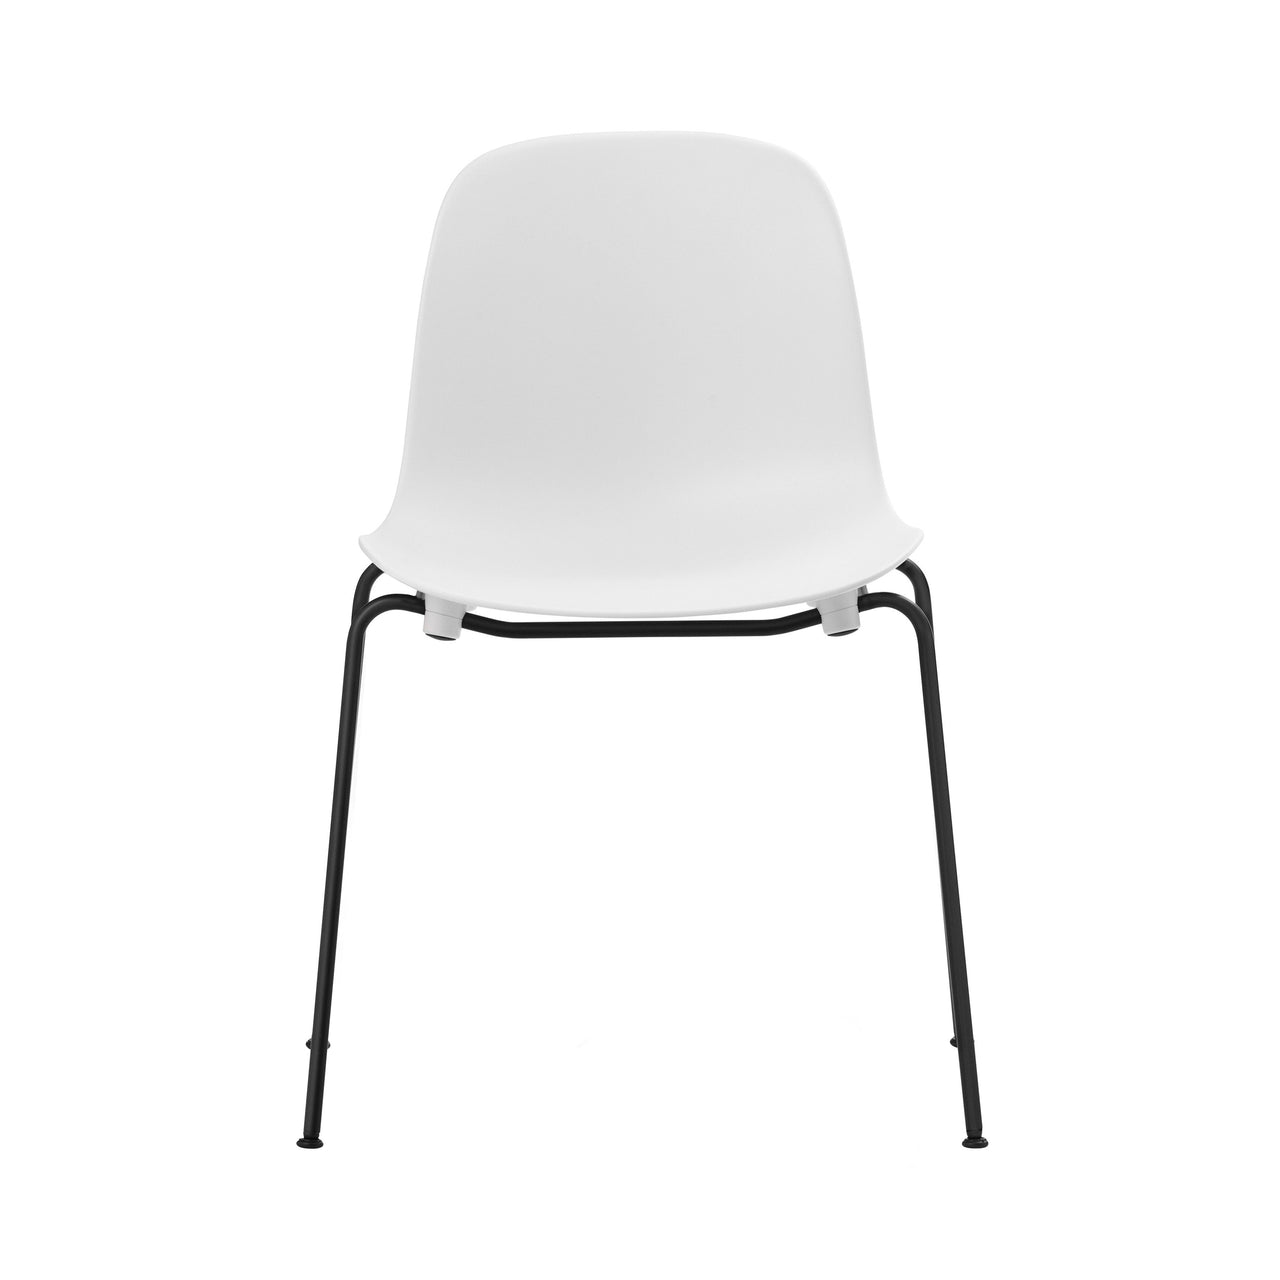 Form Stacking Chair: Steel + White